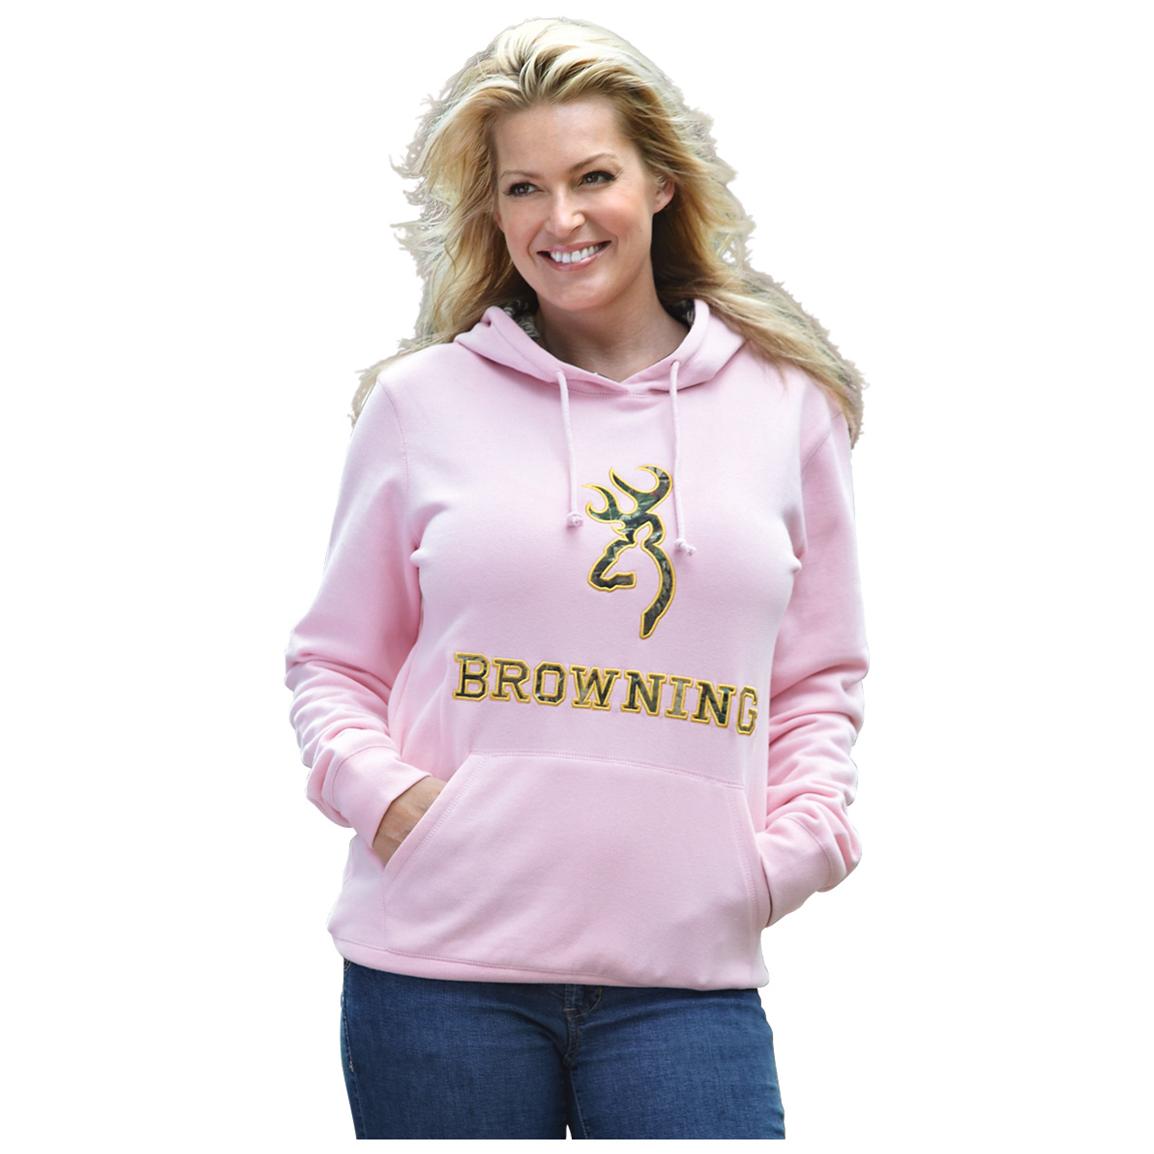 Buy > browning hoodies for her > in stock